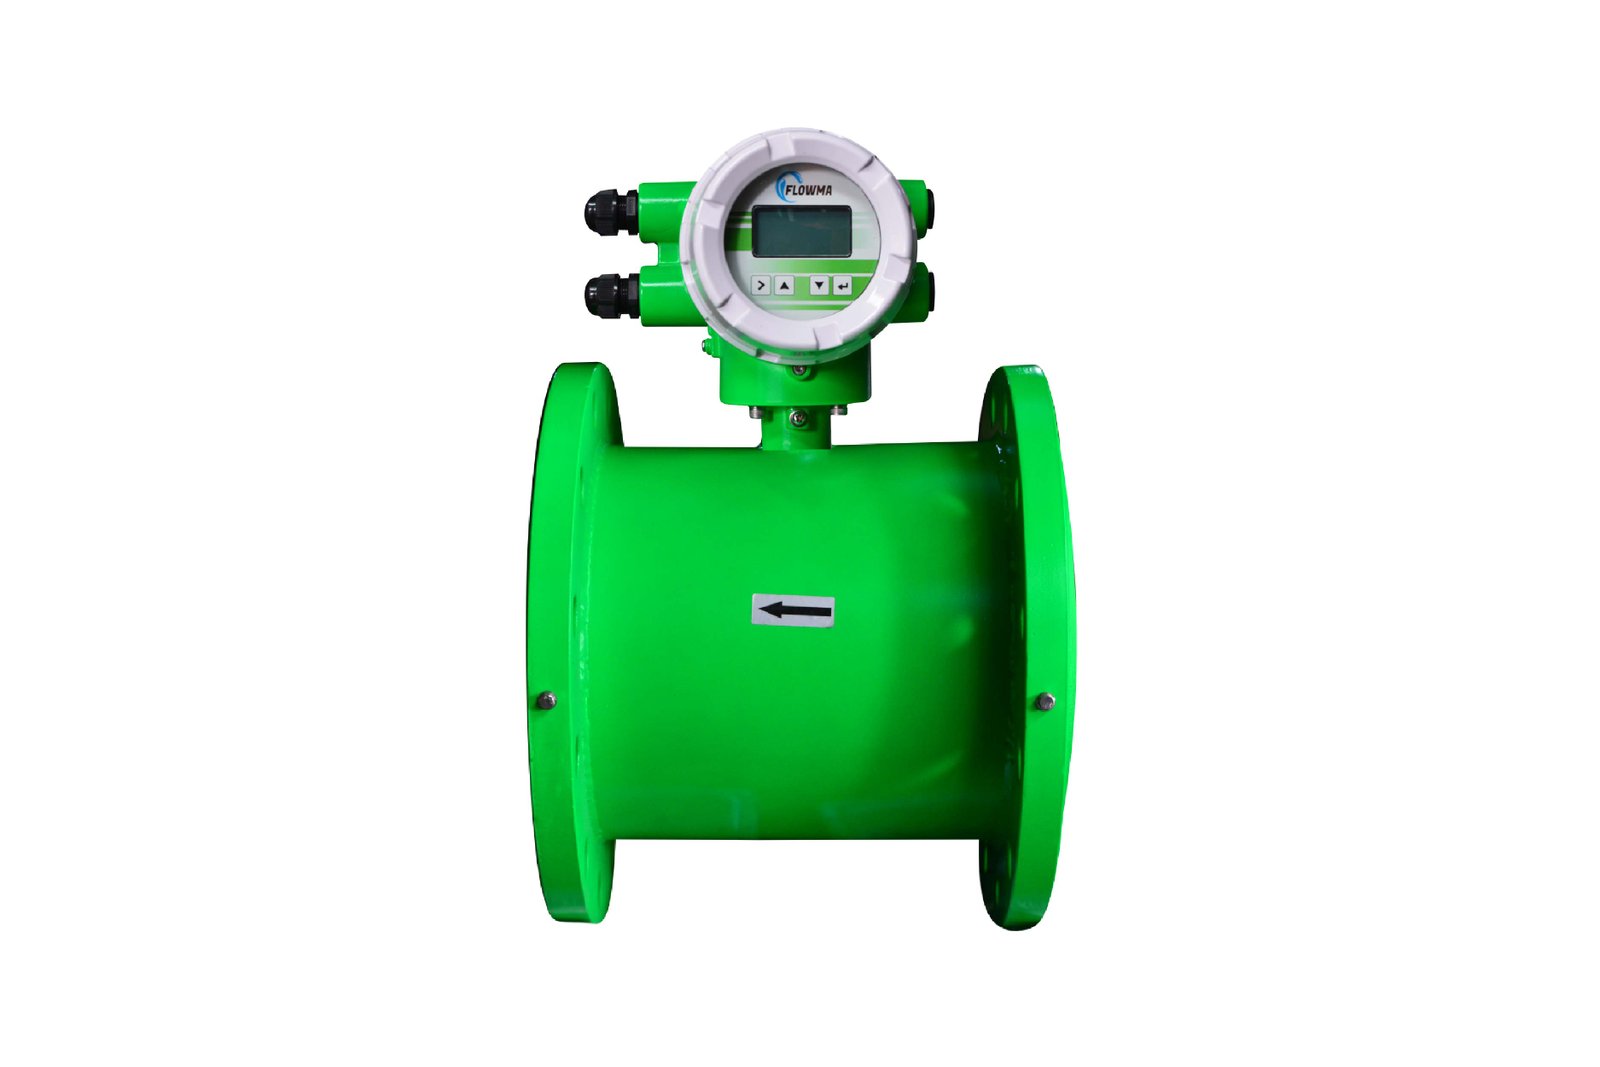 Electromagnetic Flow Meter: Working Principle, Types, and Advantages